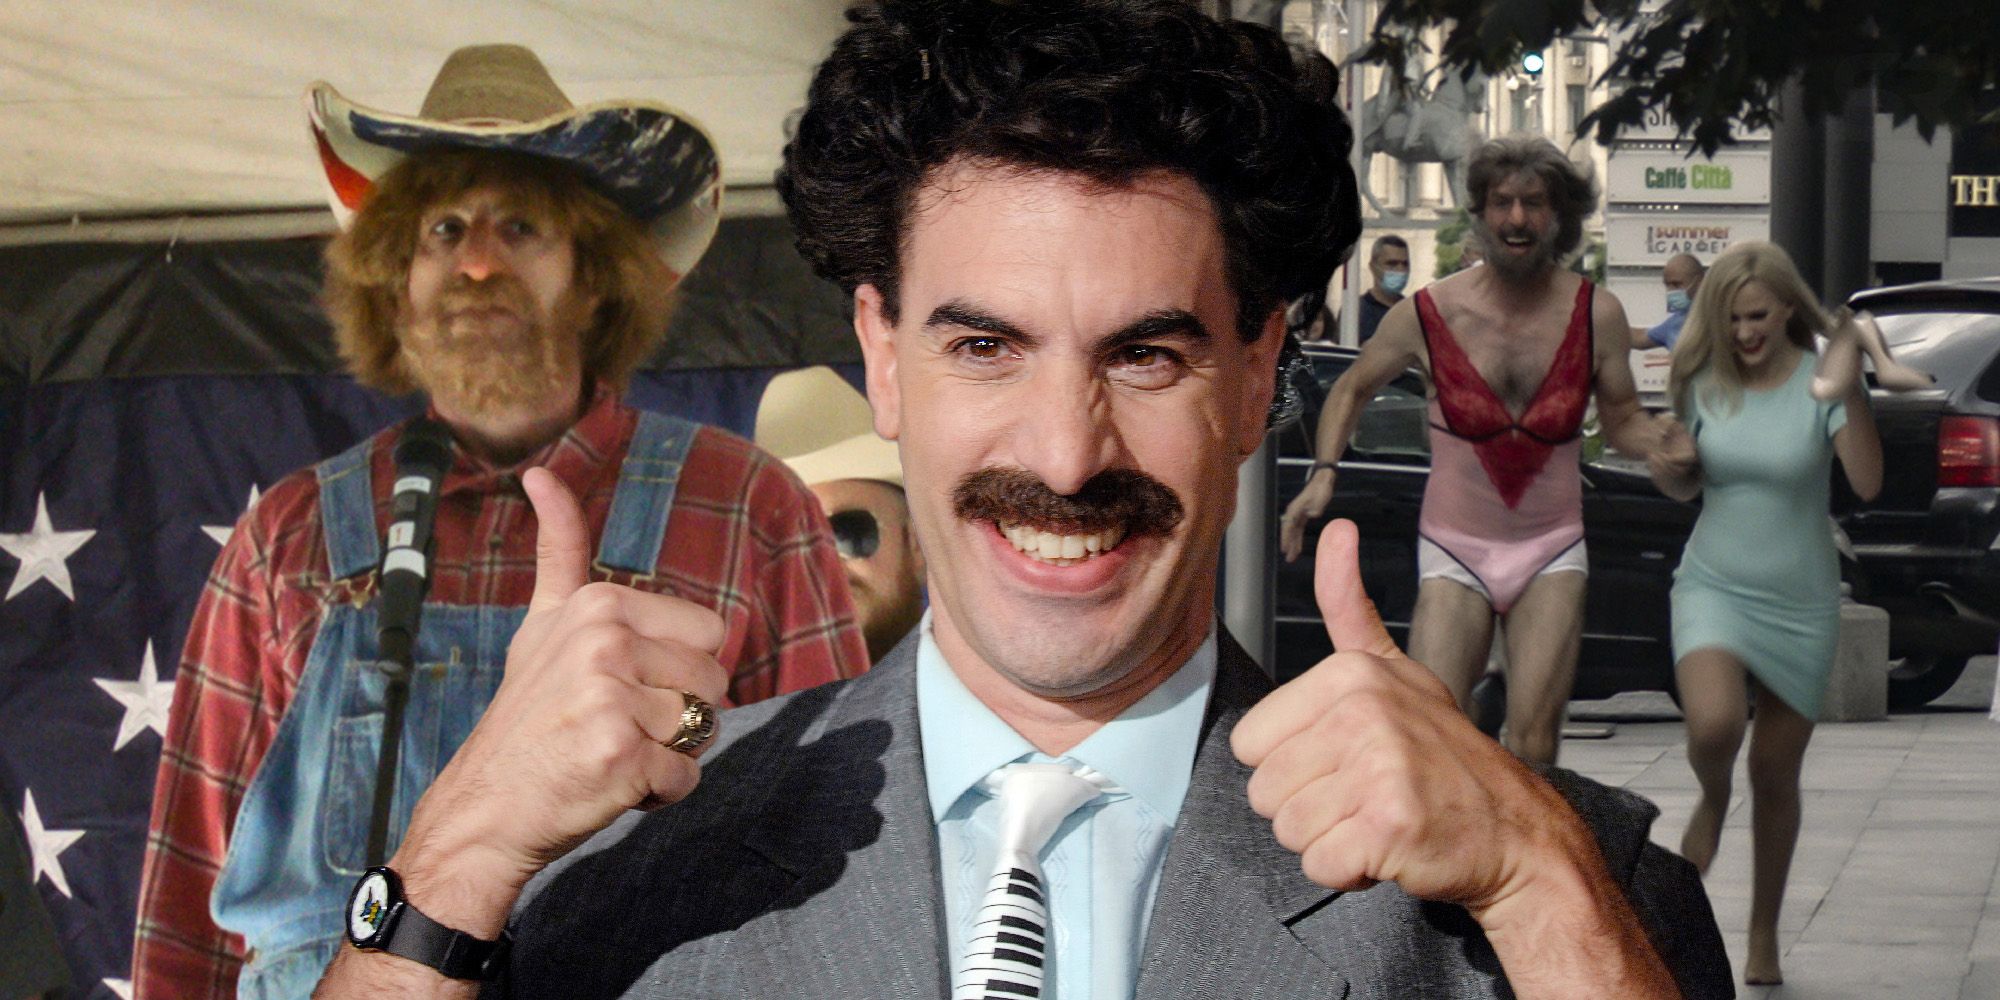 Reassessing the racial stereotyping in 'Borat' | CNN Politics